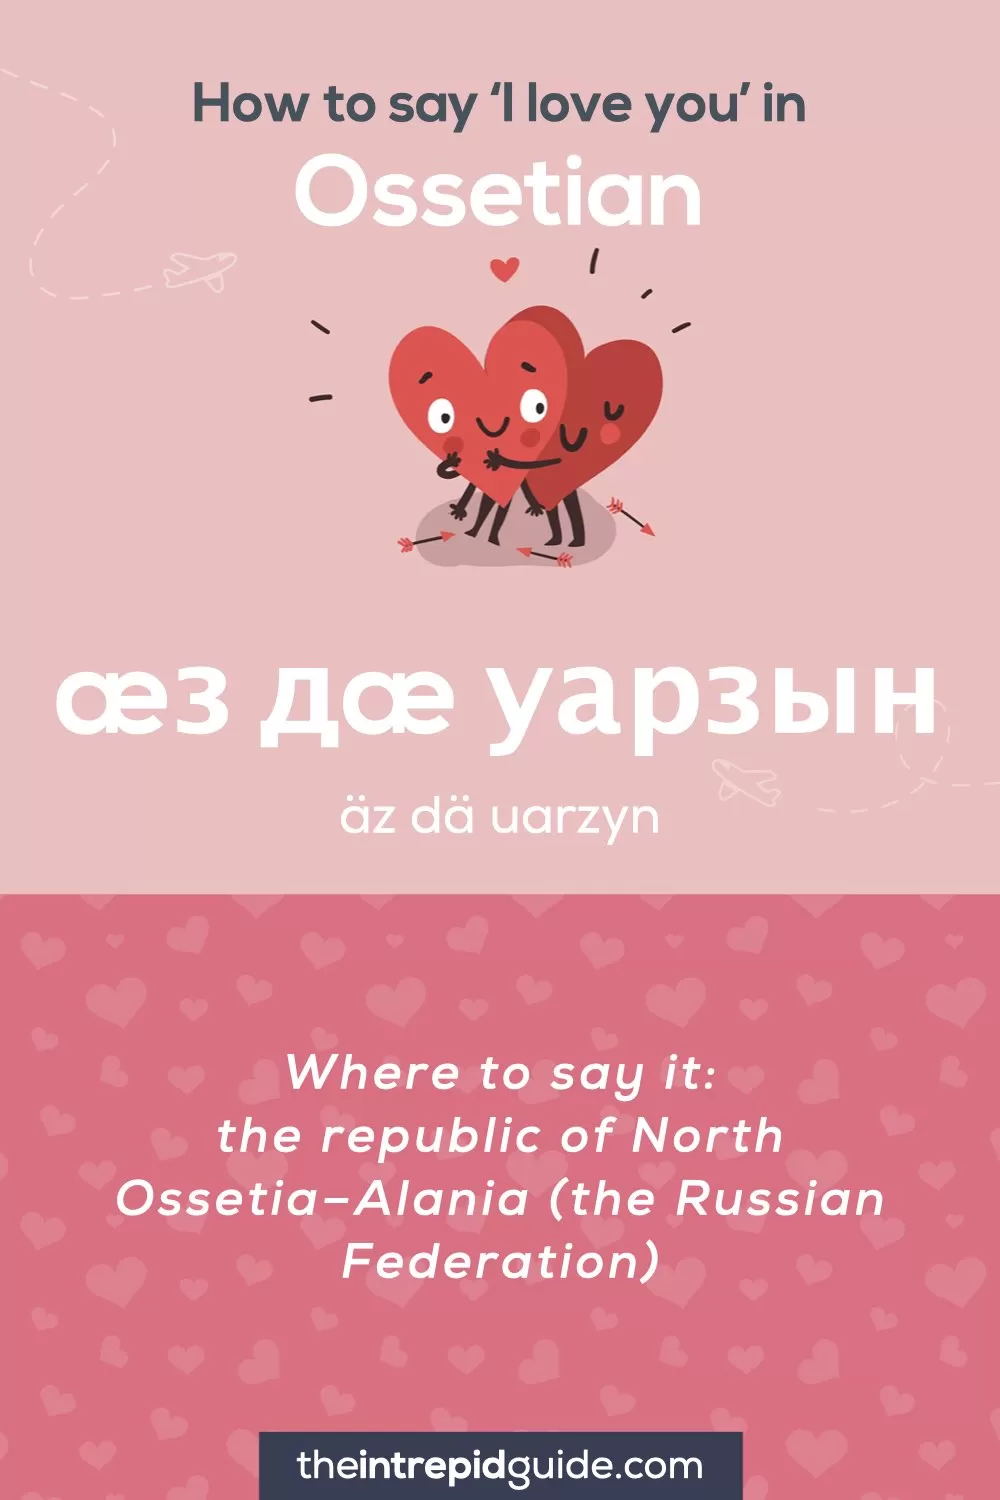 How to say I love you in different languages - Ossetian - æз дæ уарзын